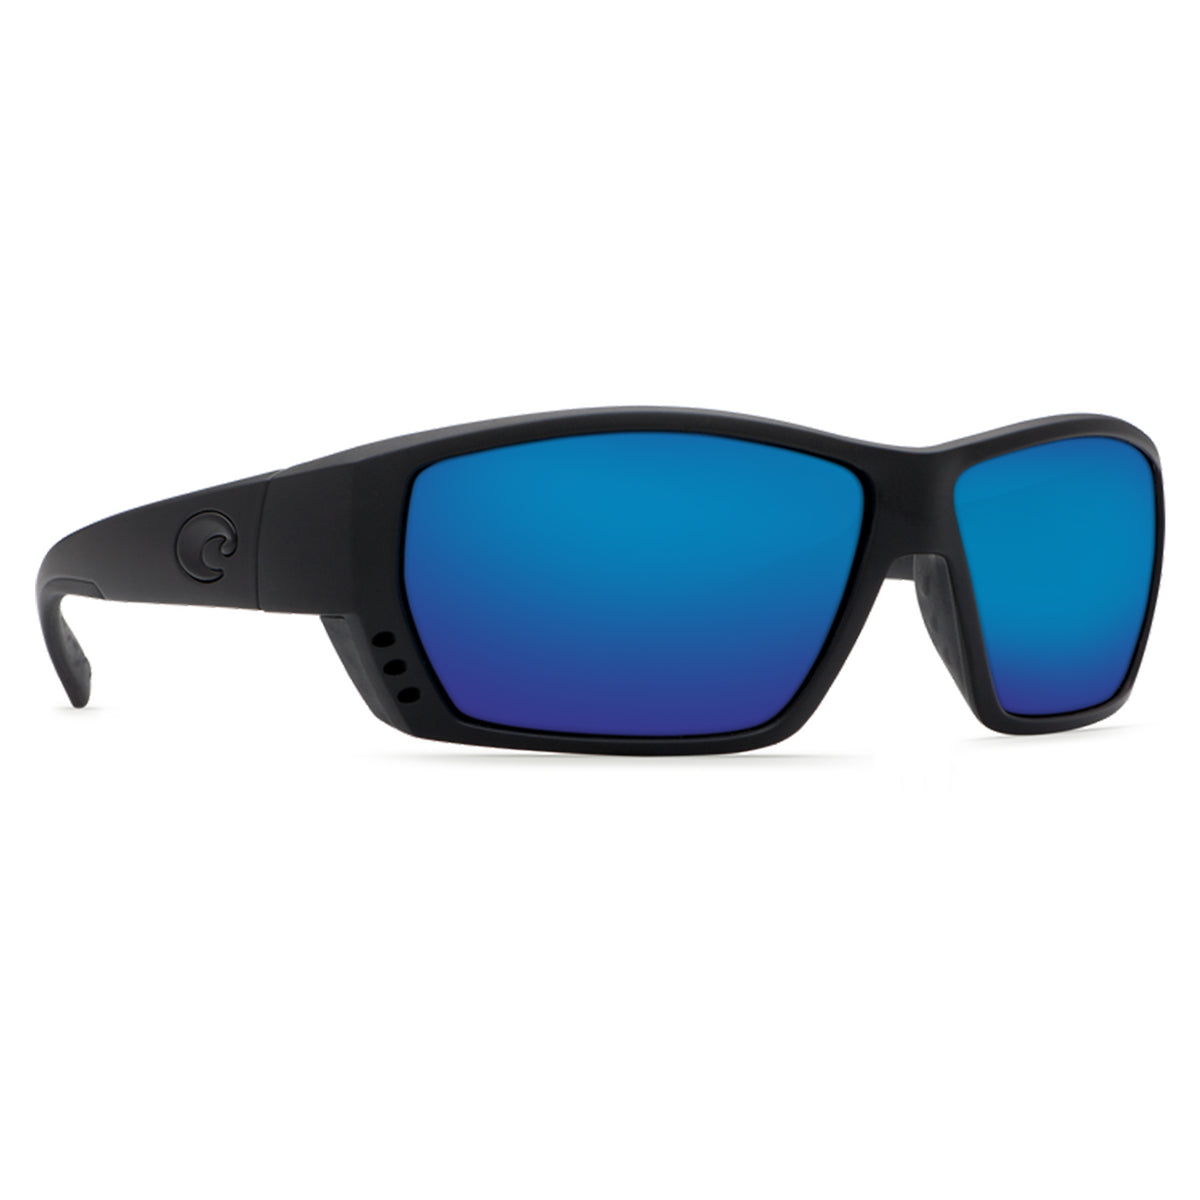 Tuna Alley Blackout Frame with Blue Mirror 580G